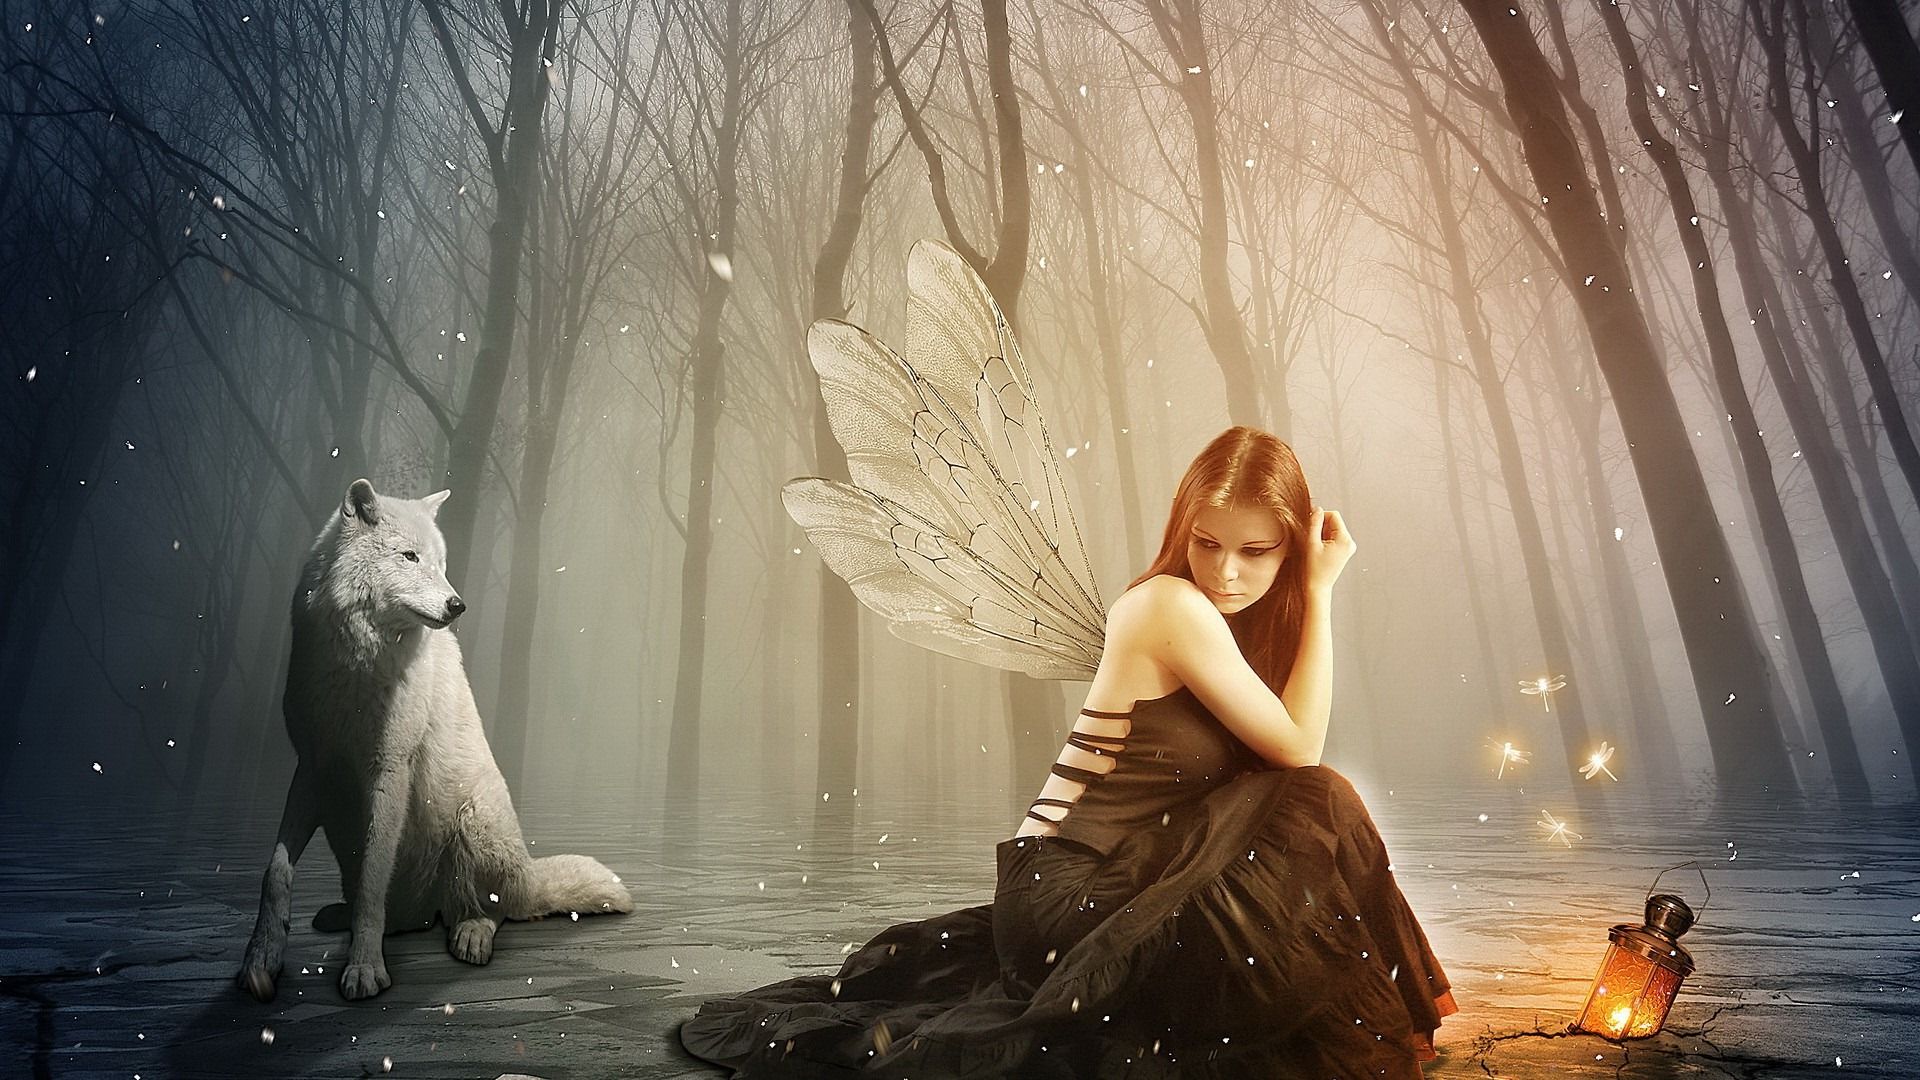 The girl with wings - (1920x1080 pixels wide).4 kb, v.2.9